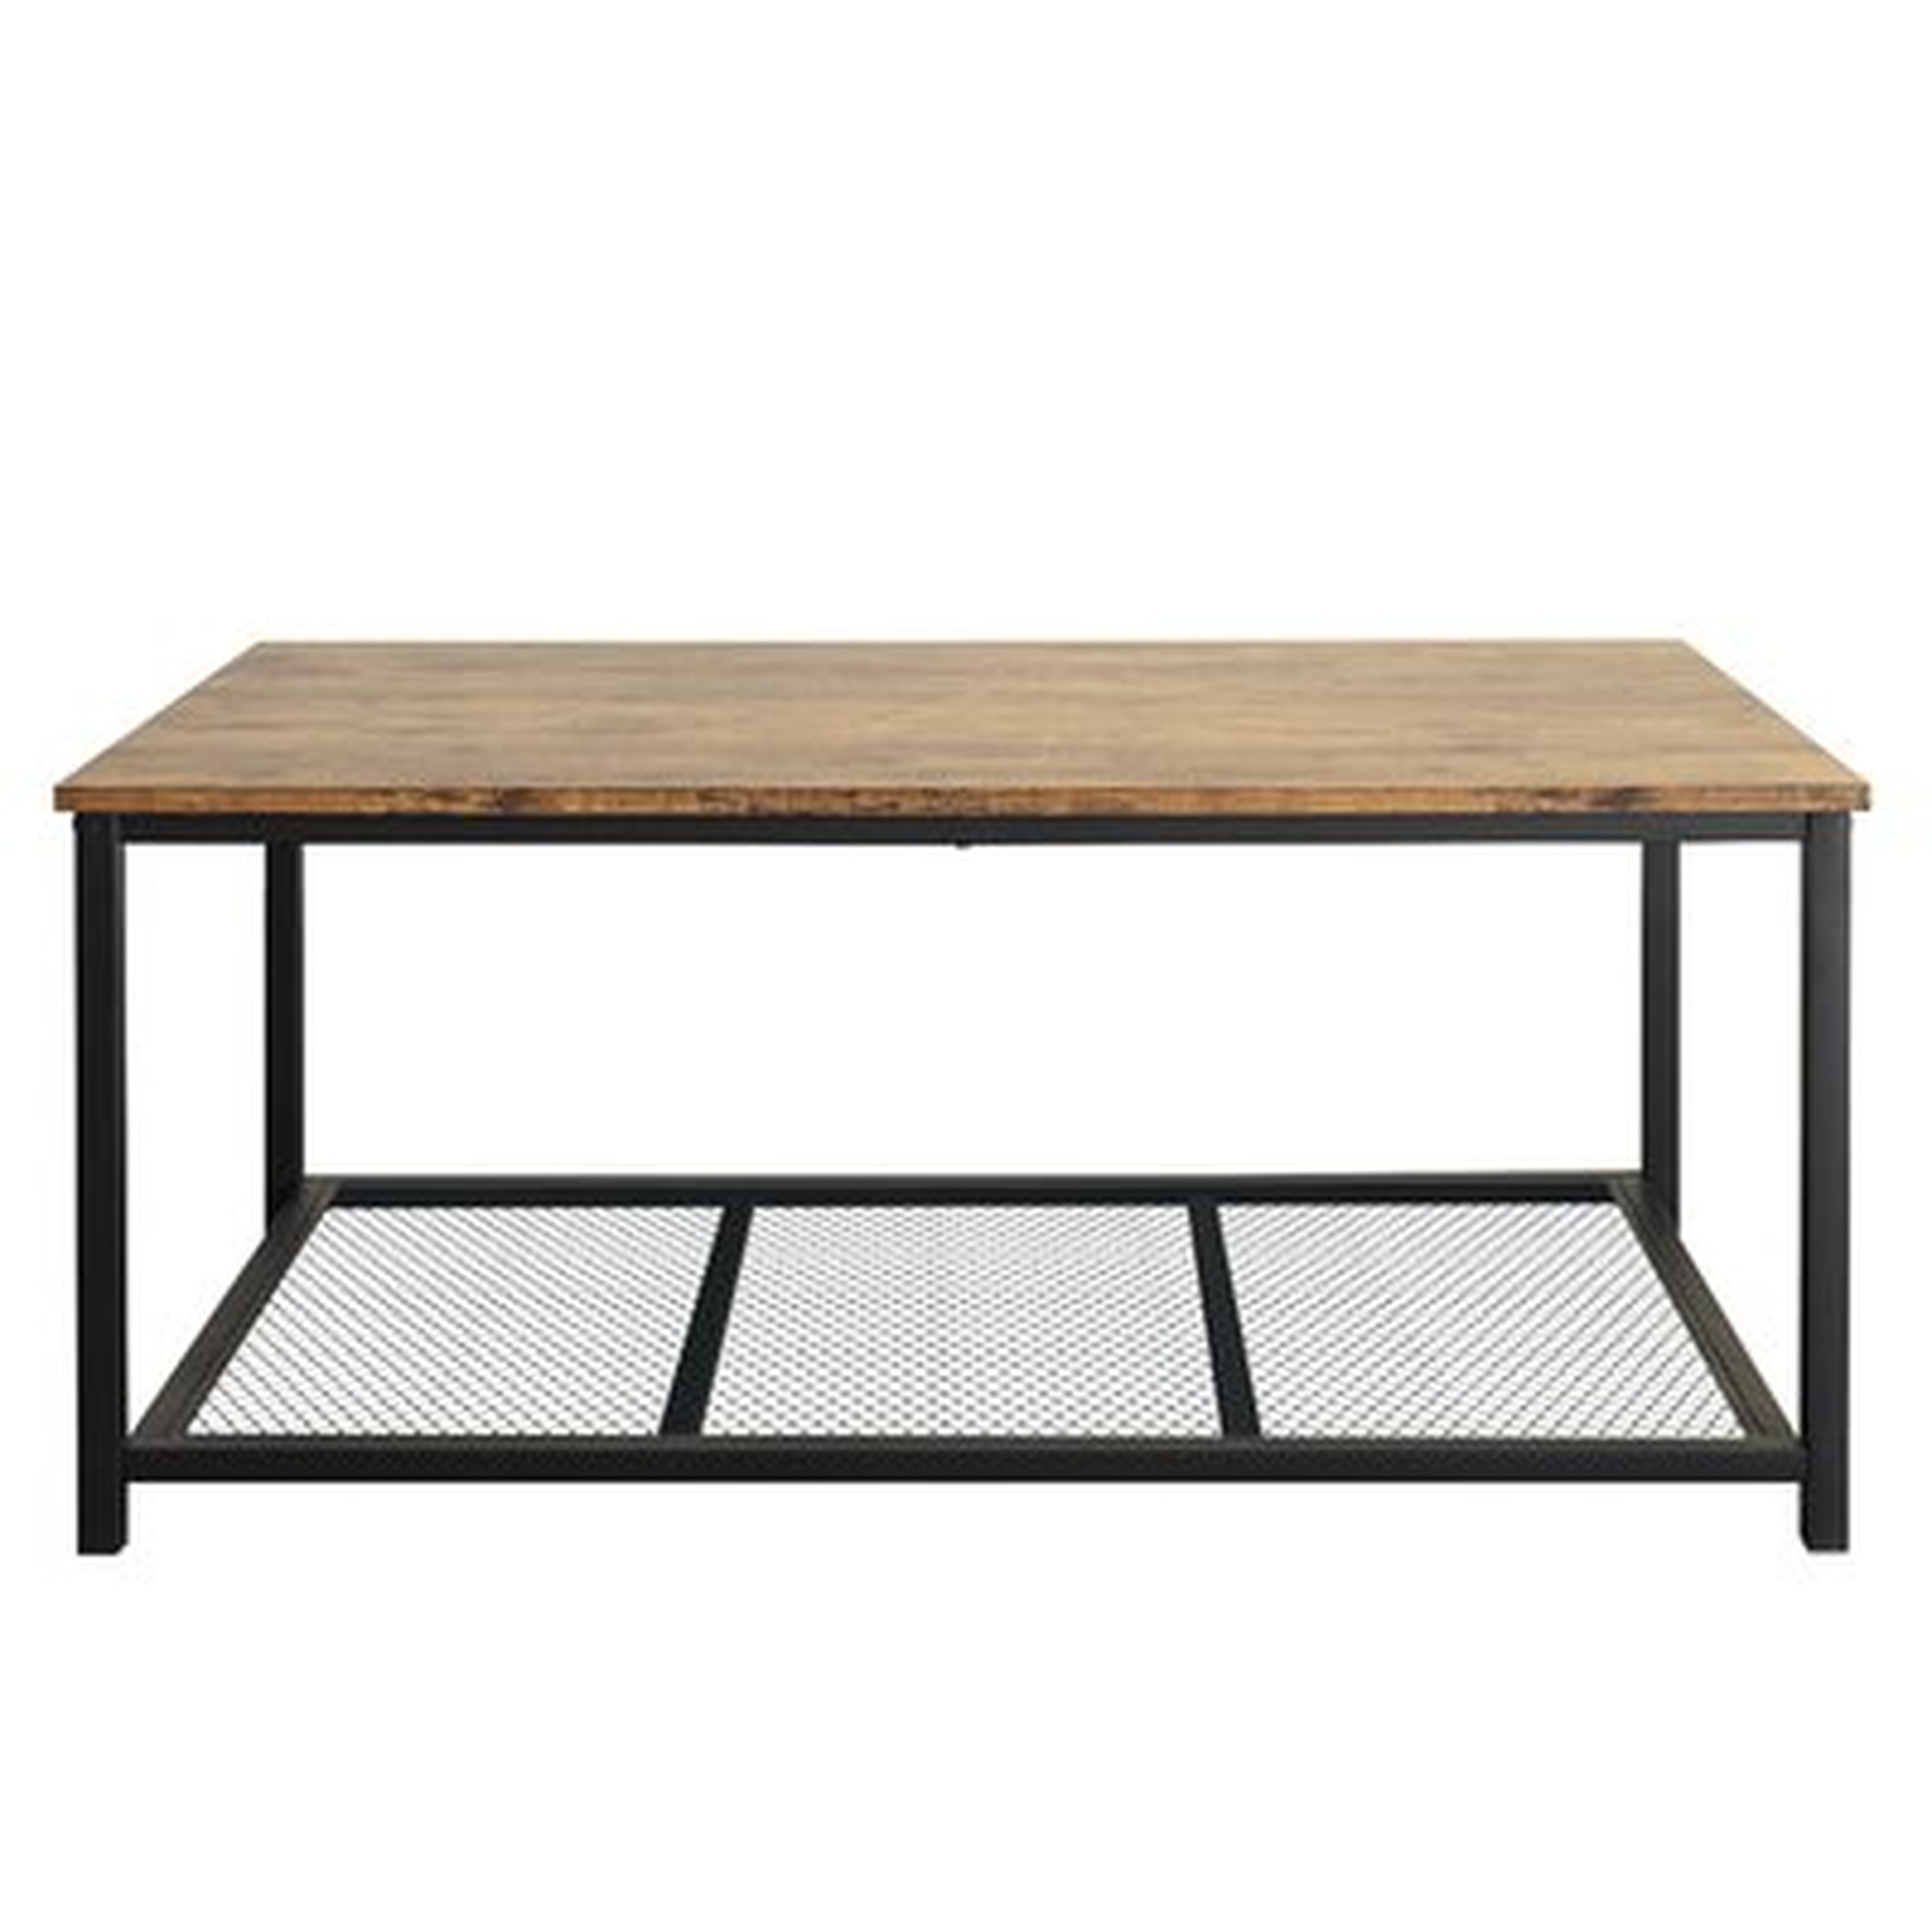 Trustmade Coffee Table With Steel Frame And Storage - Wayfair